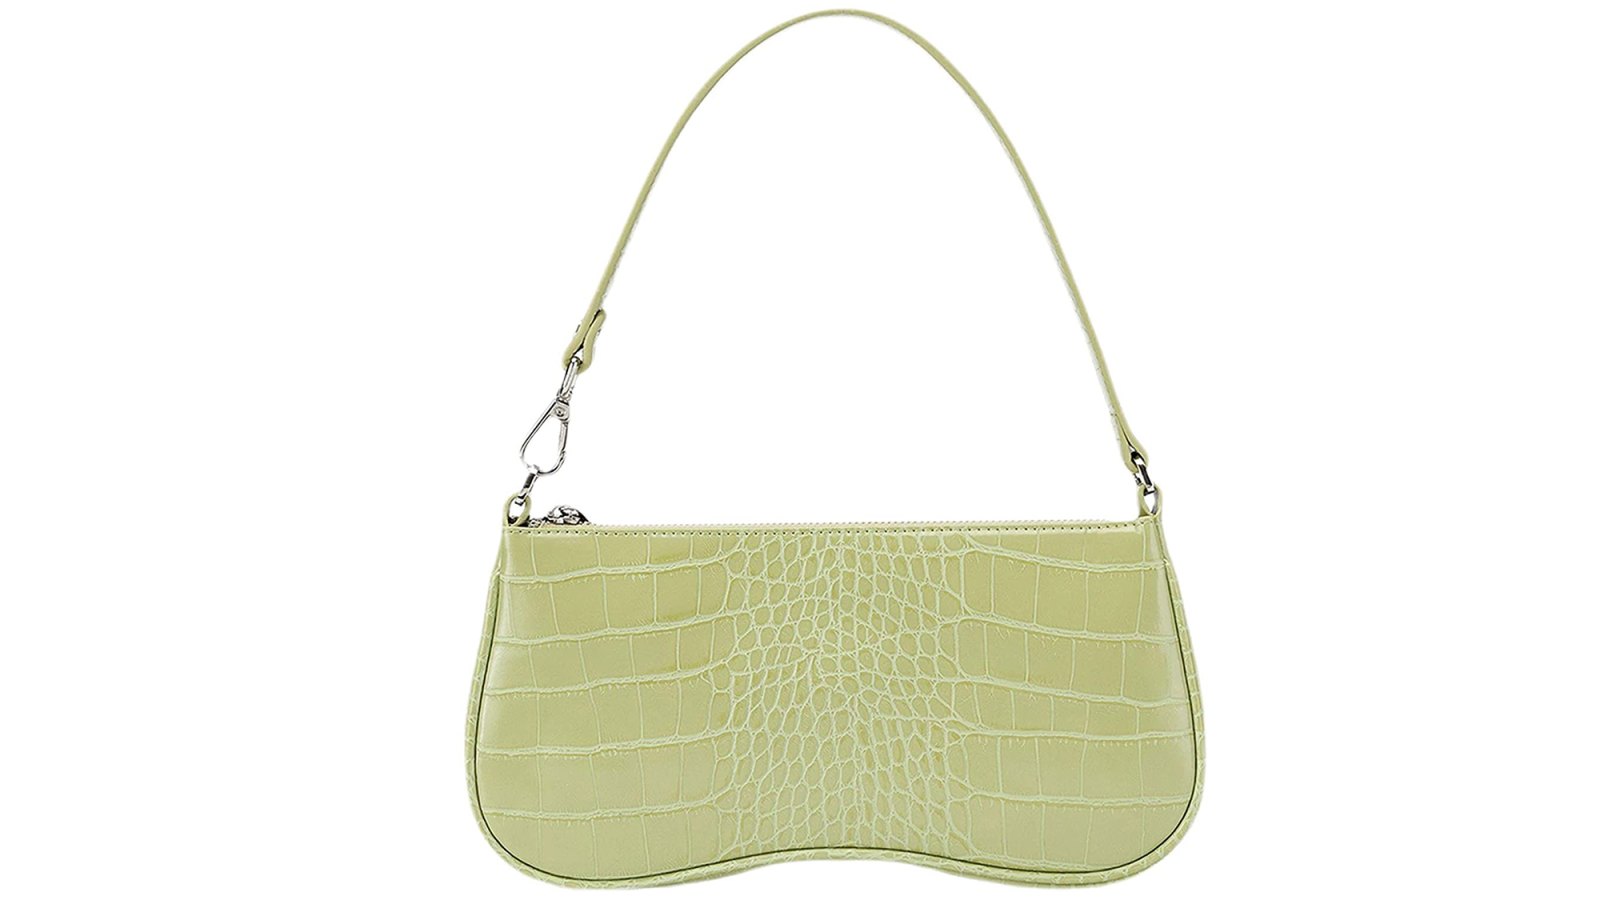 Throw It Back to the '90s With This Chic Crocodile Print Purse